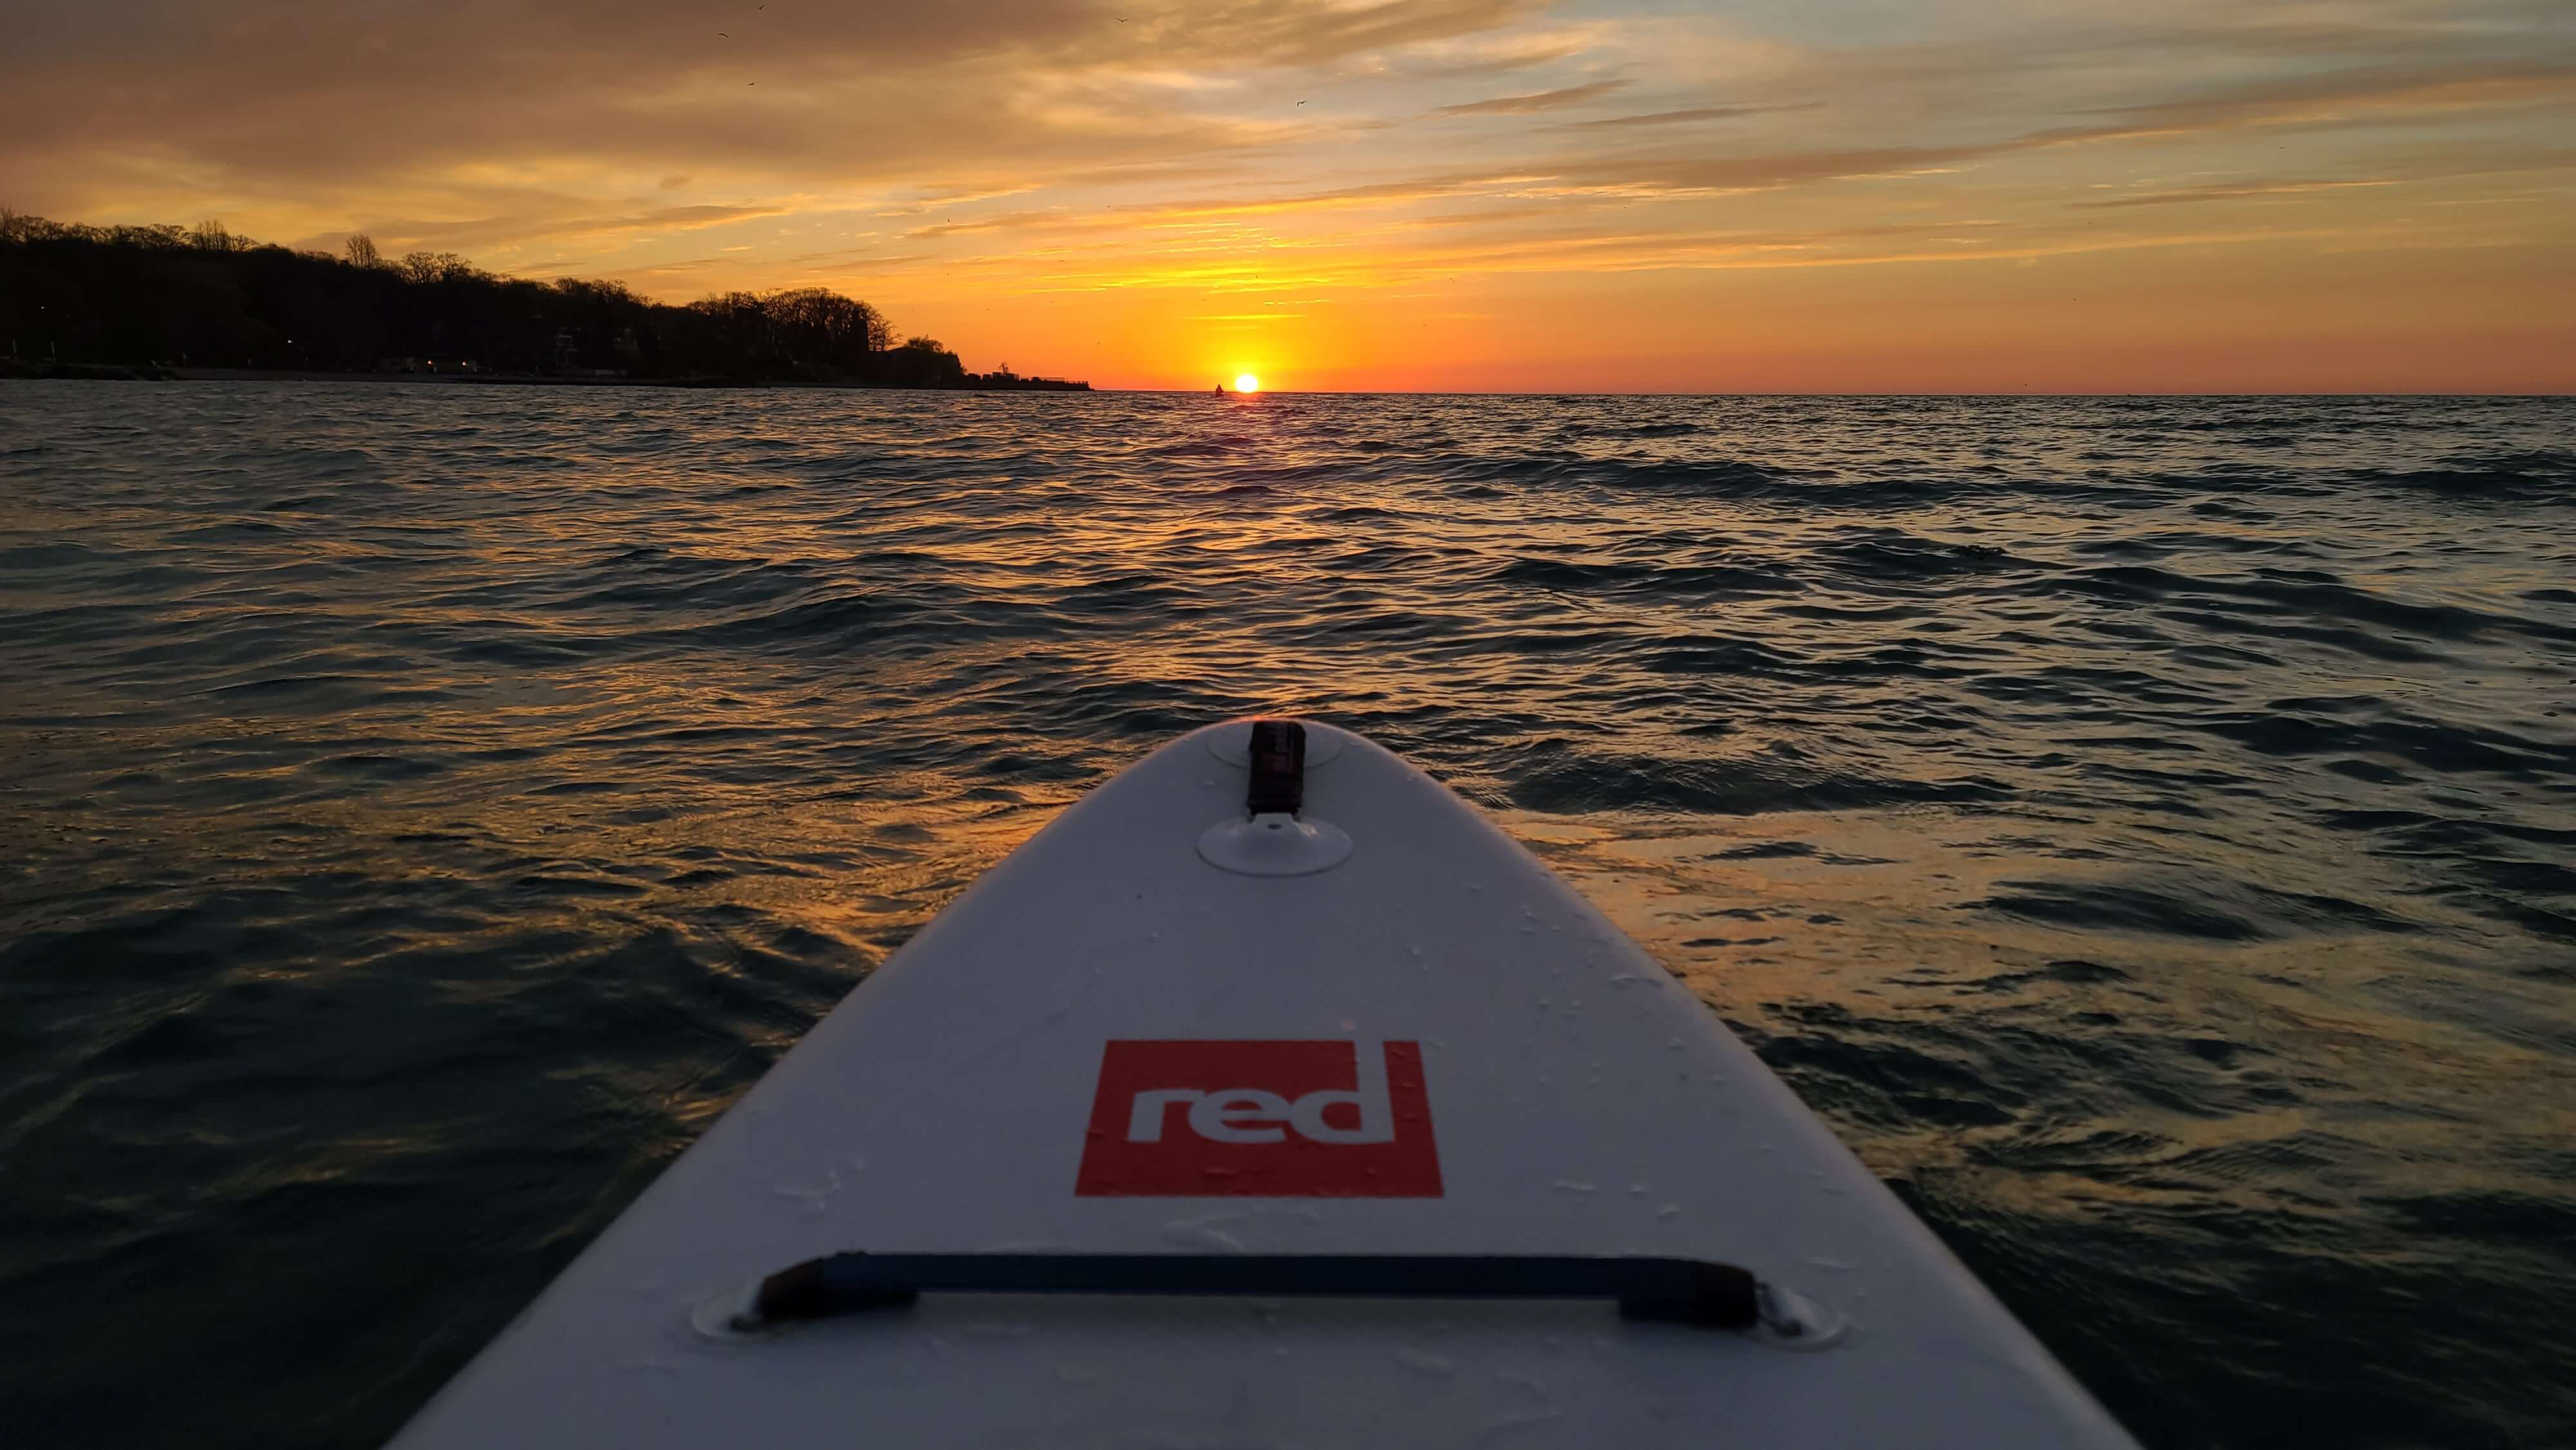 Red Original paddle board on a lake in the sunset